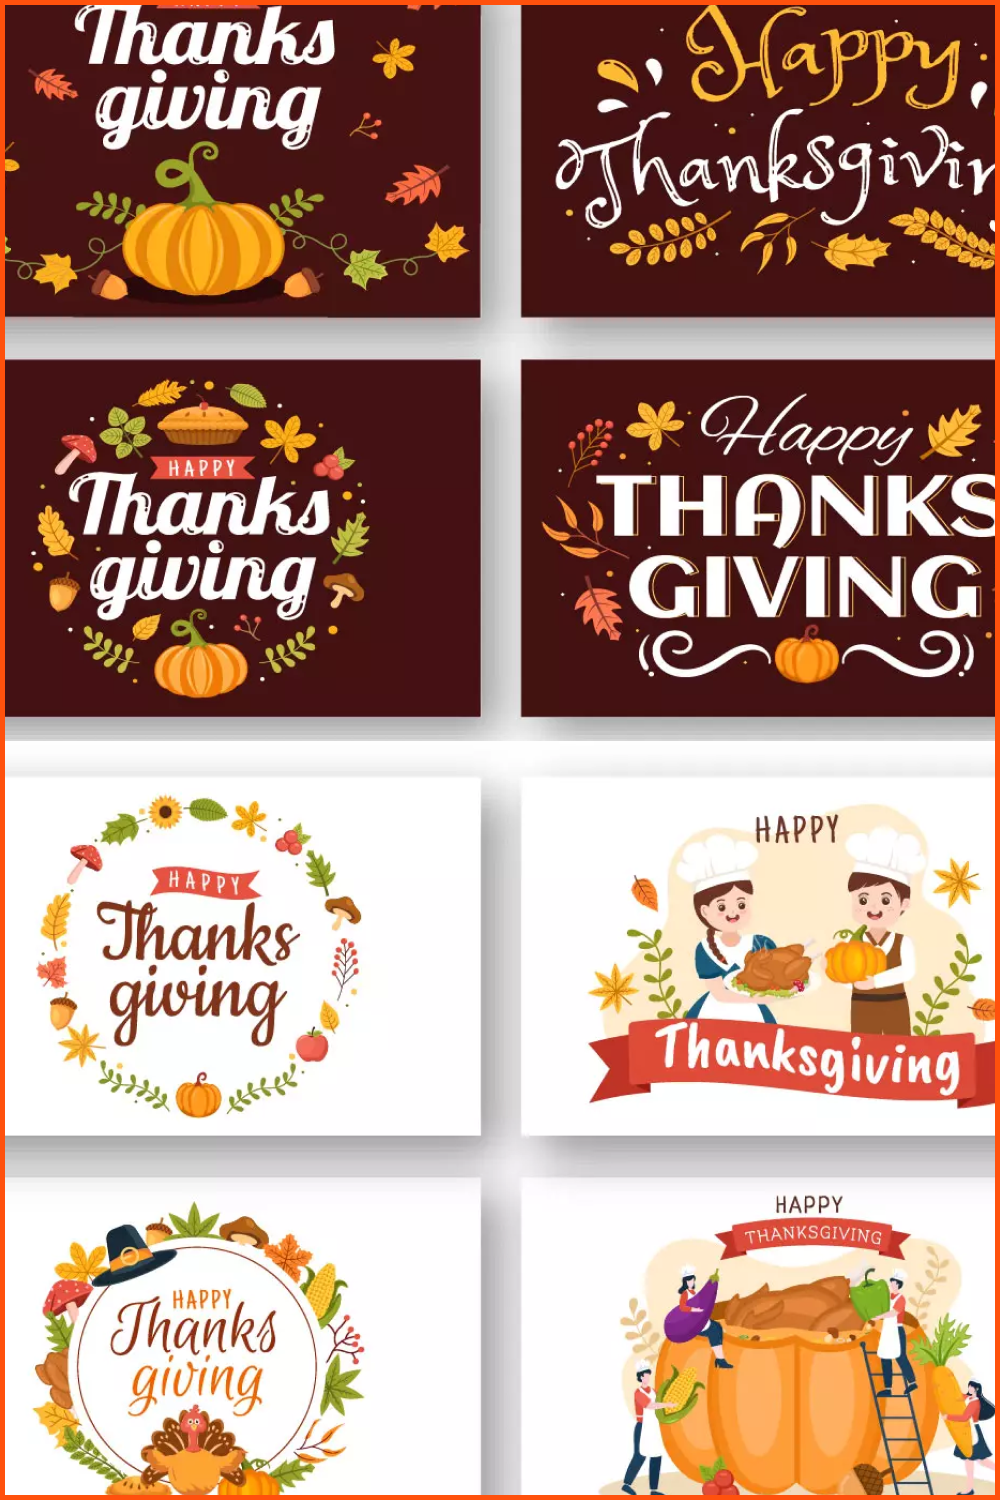 Collage of images of pumpkins, children, turkeys and thanksgiving day inscriptions.